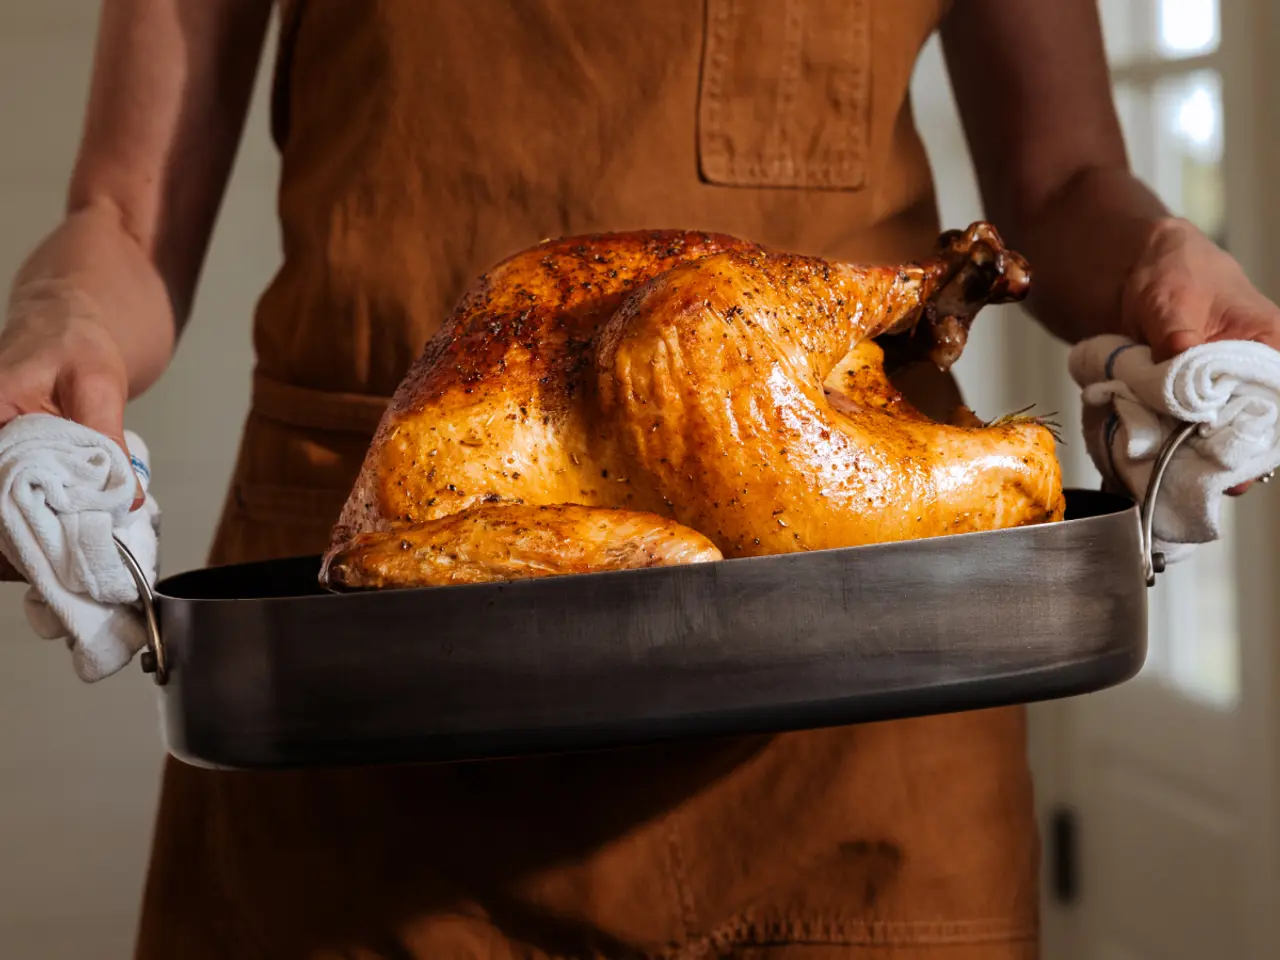 Person in an apron holding a roasted turkey in a pan with oven gloves.